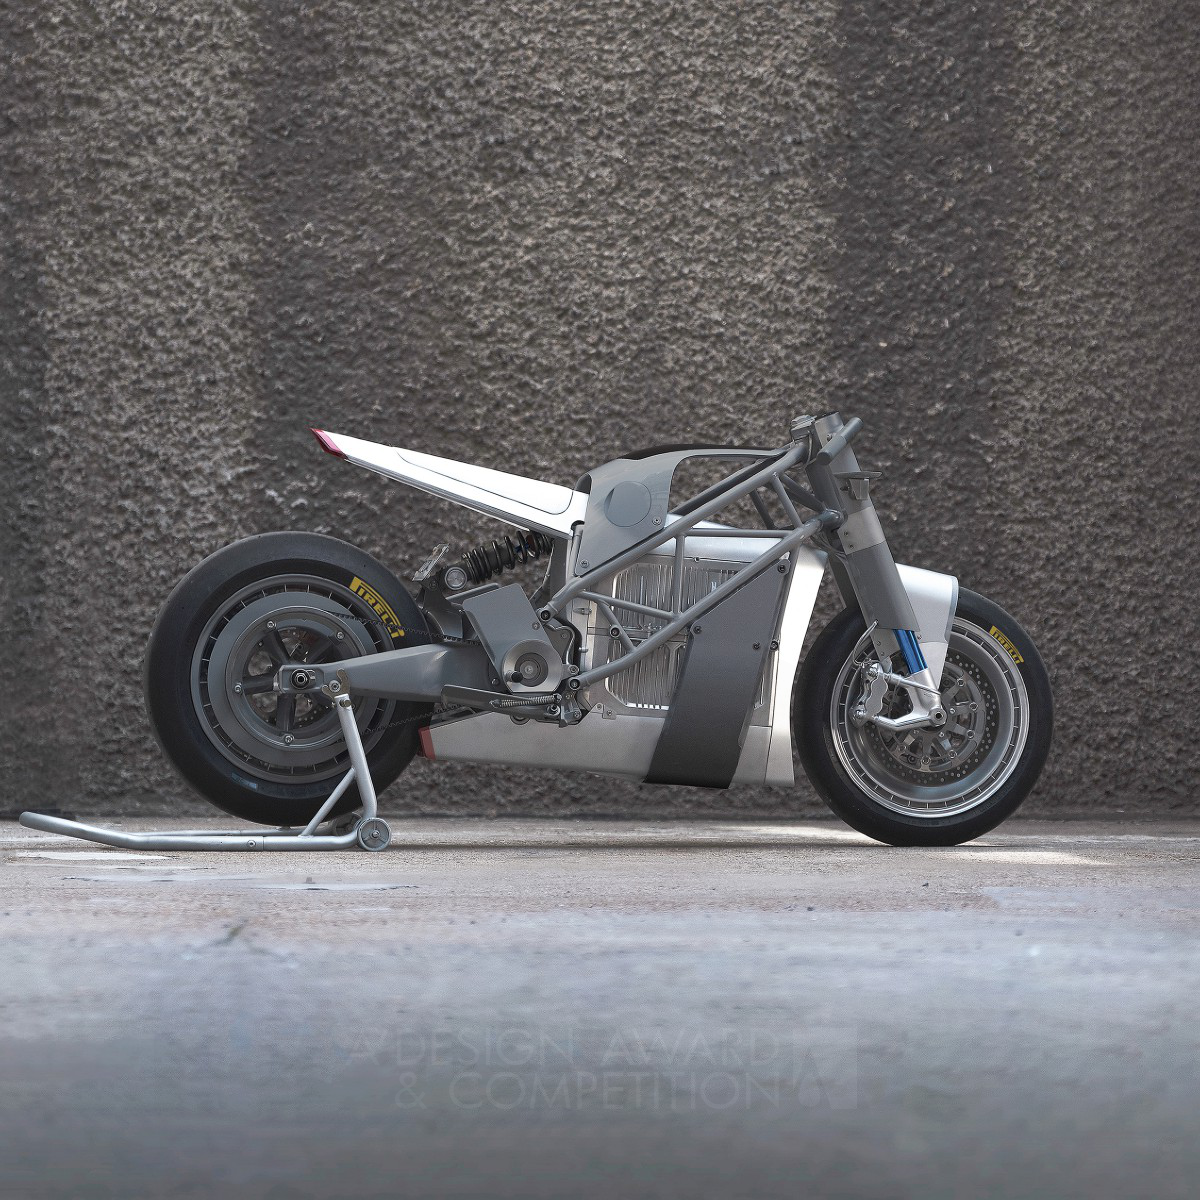 Hugo Eccles wins Golden at the prestigious A' Vehicle, Mobility and Transportation Design Award with XP Zero Electric Motorcycle.